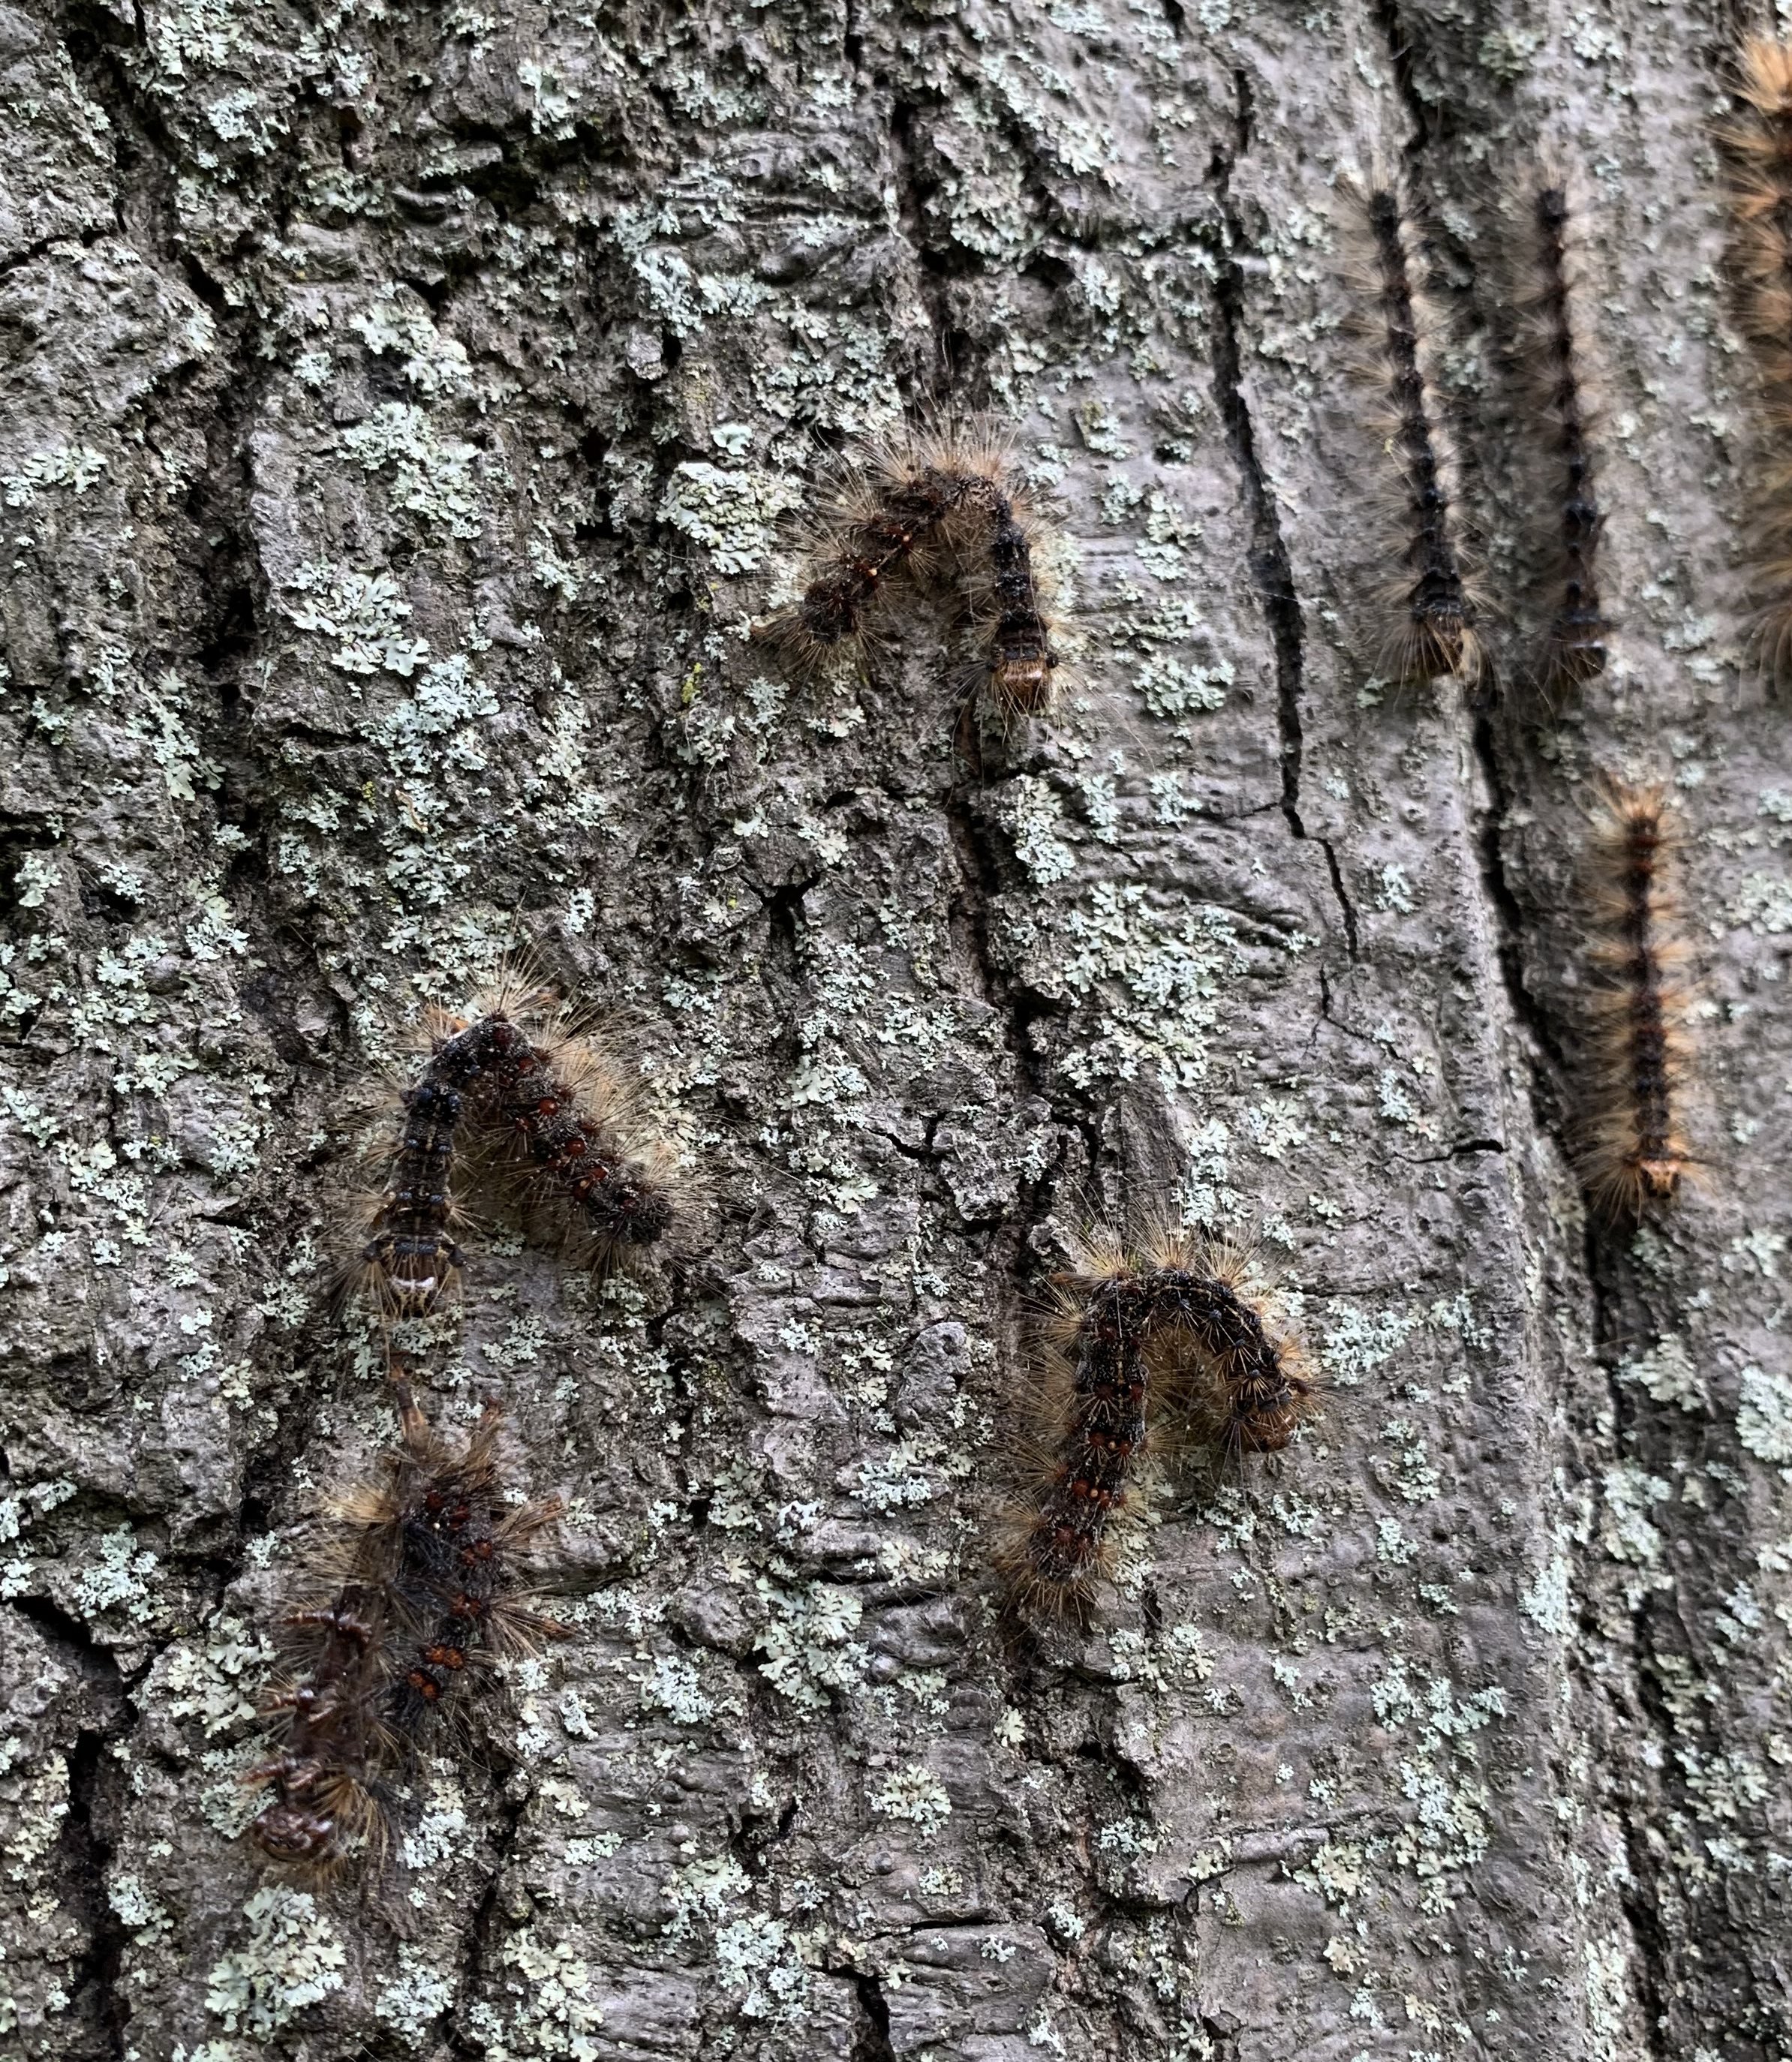 Gypsy moth infected by virus